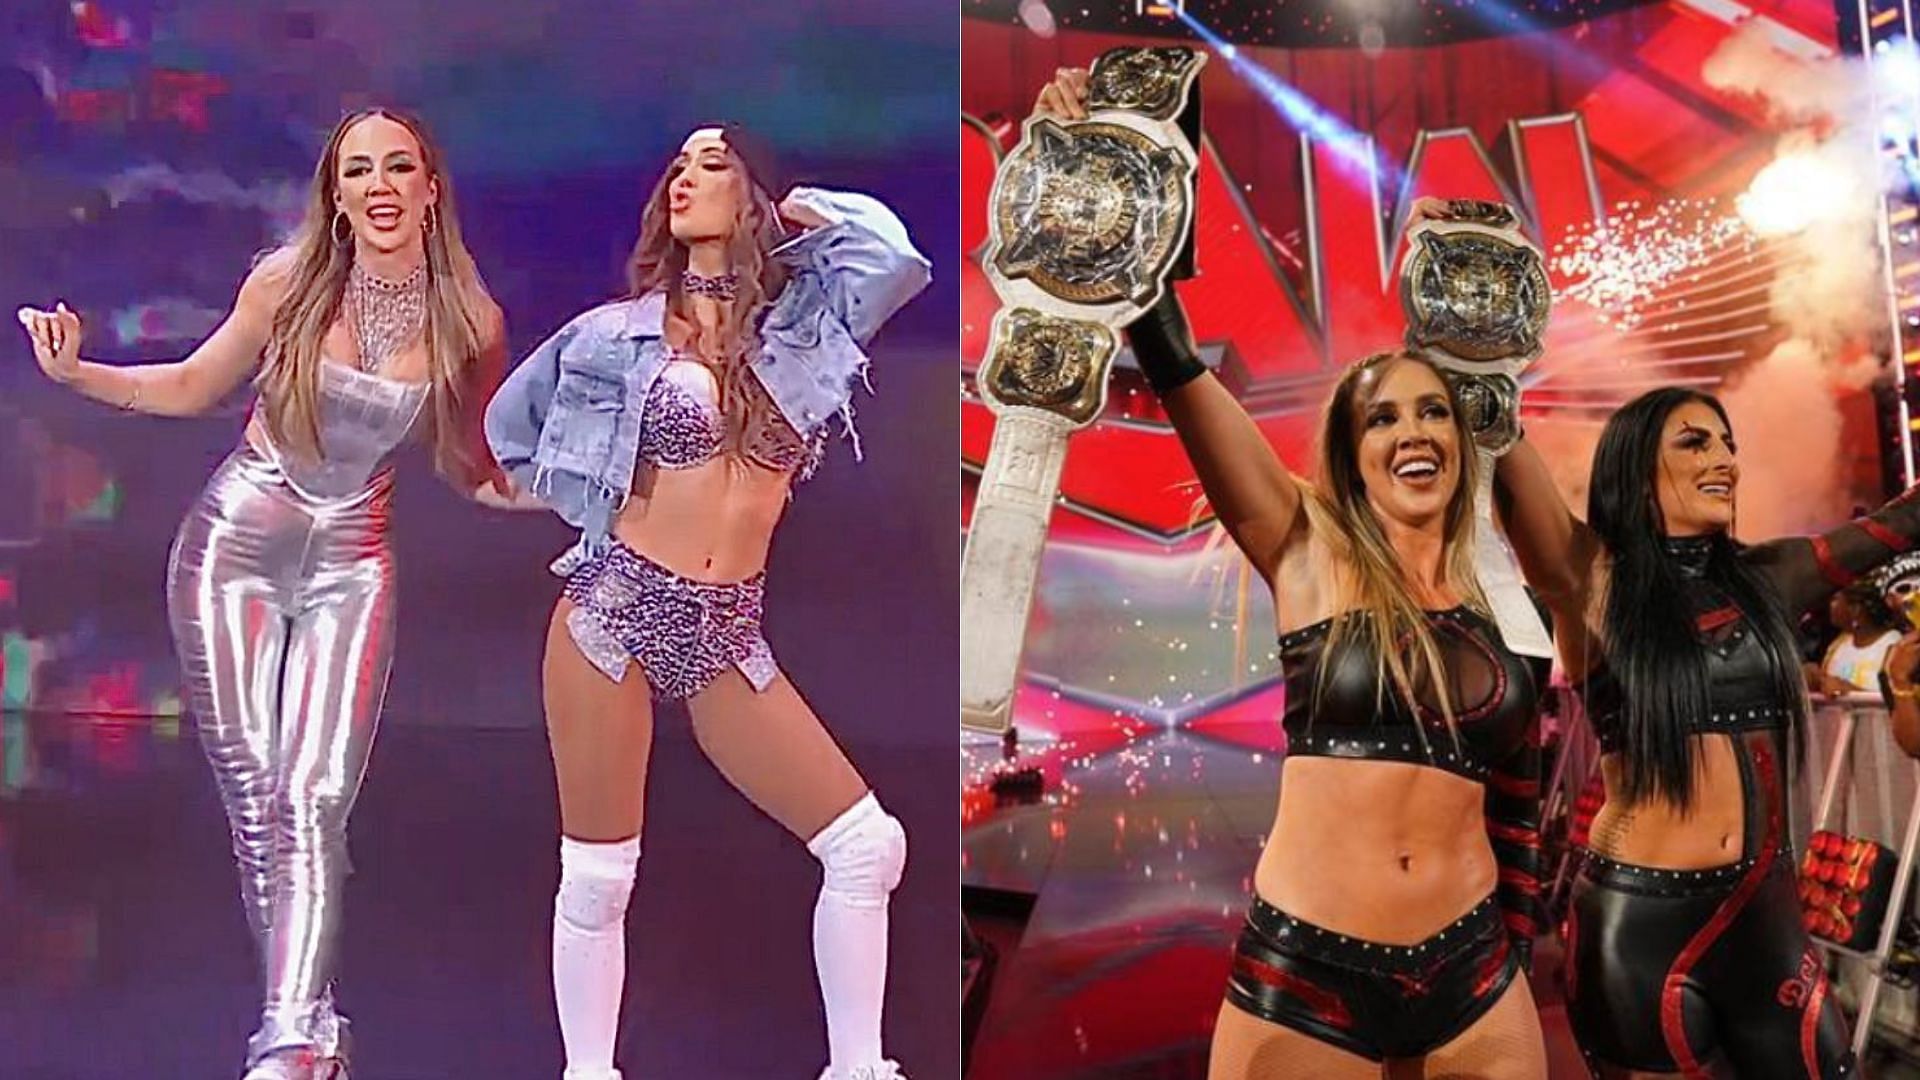 Chelsea Green and Carmella (left); Chelsea Green and Sonya Deville (right)